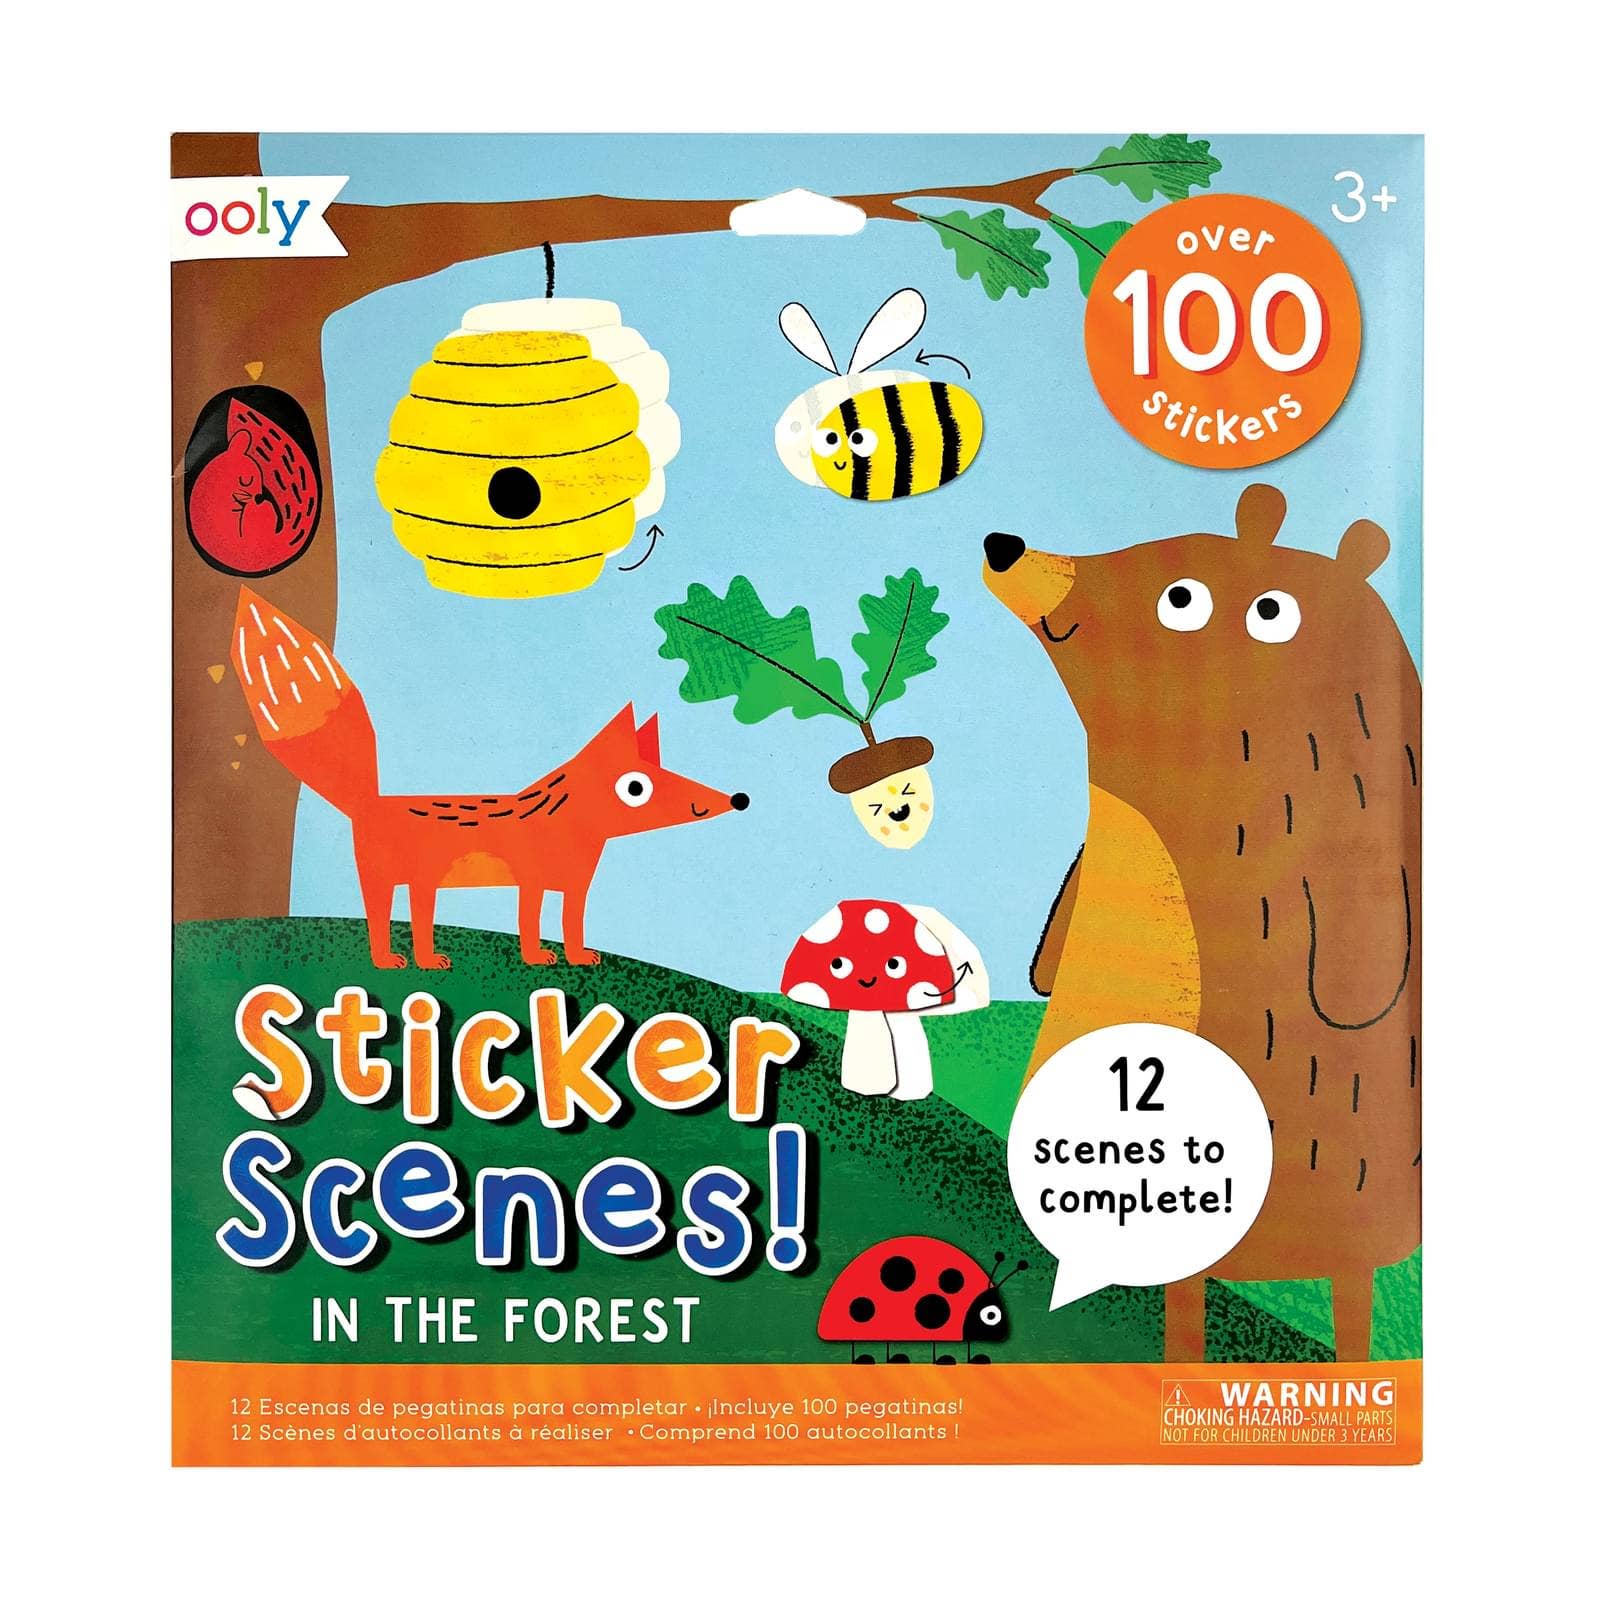 In The Forest Sticker Scenes